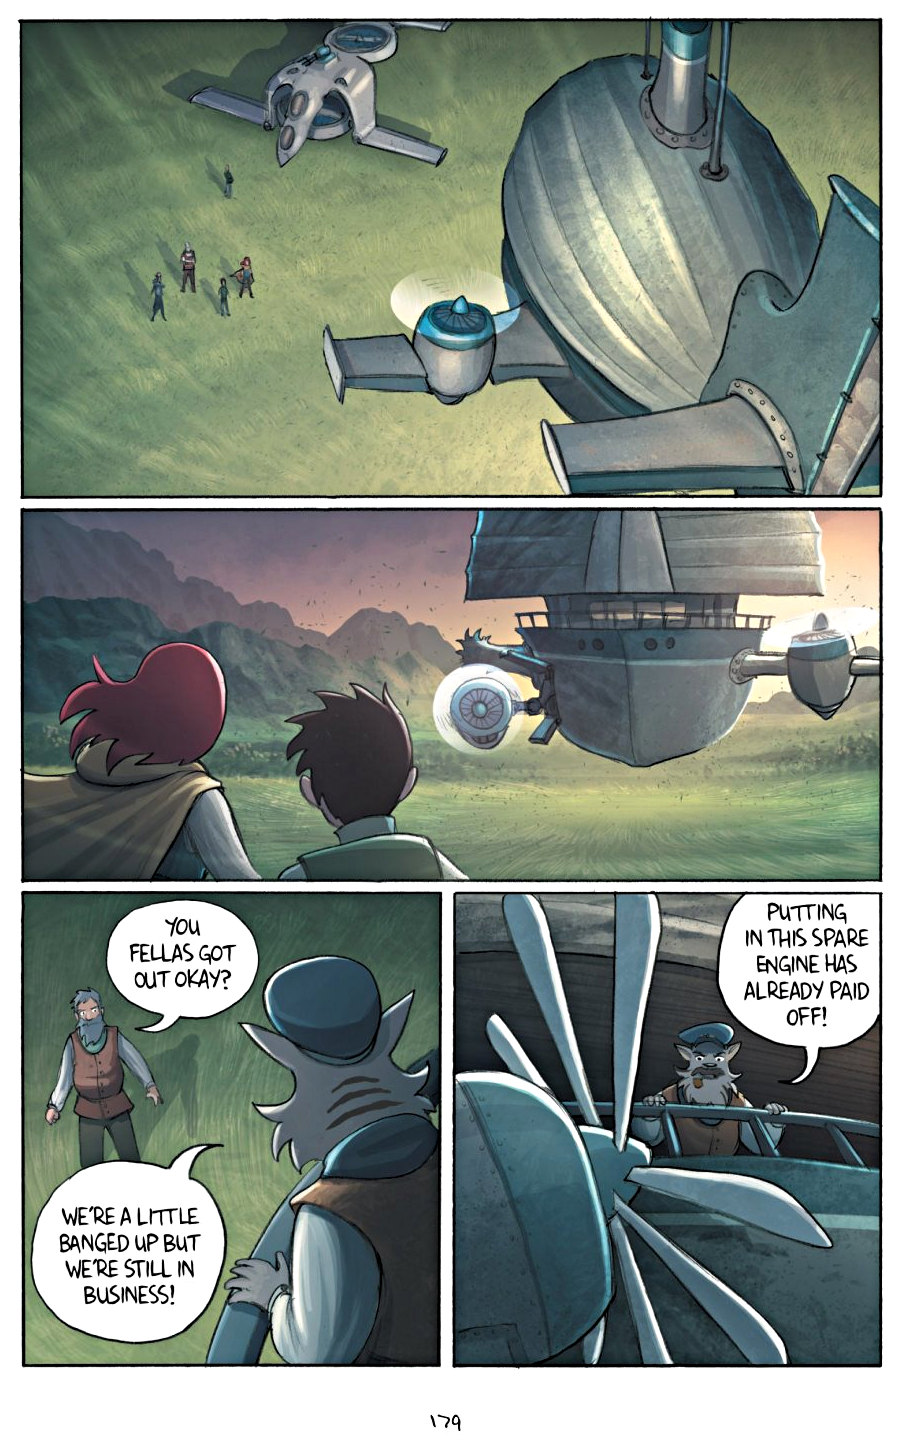 page 179 of amulet 5 prince of the elves graphic novel